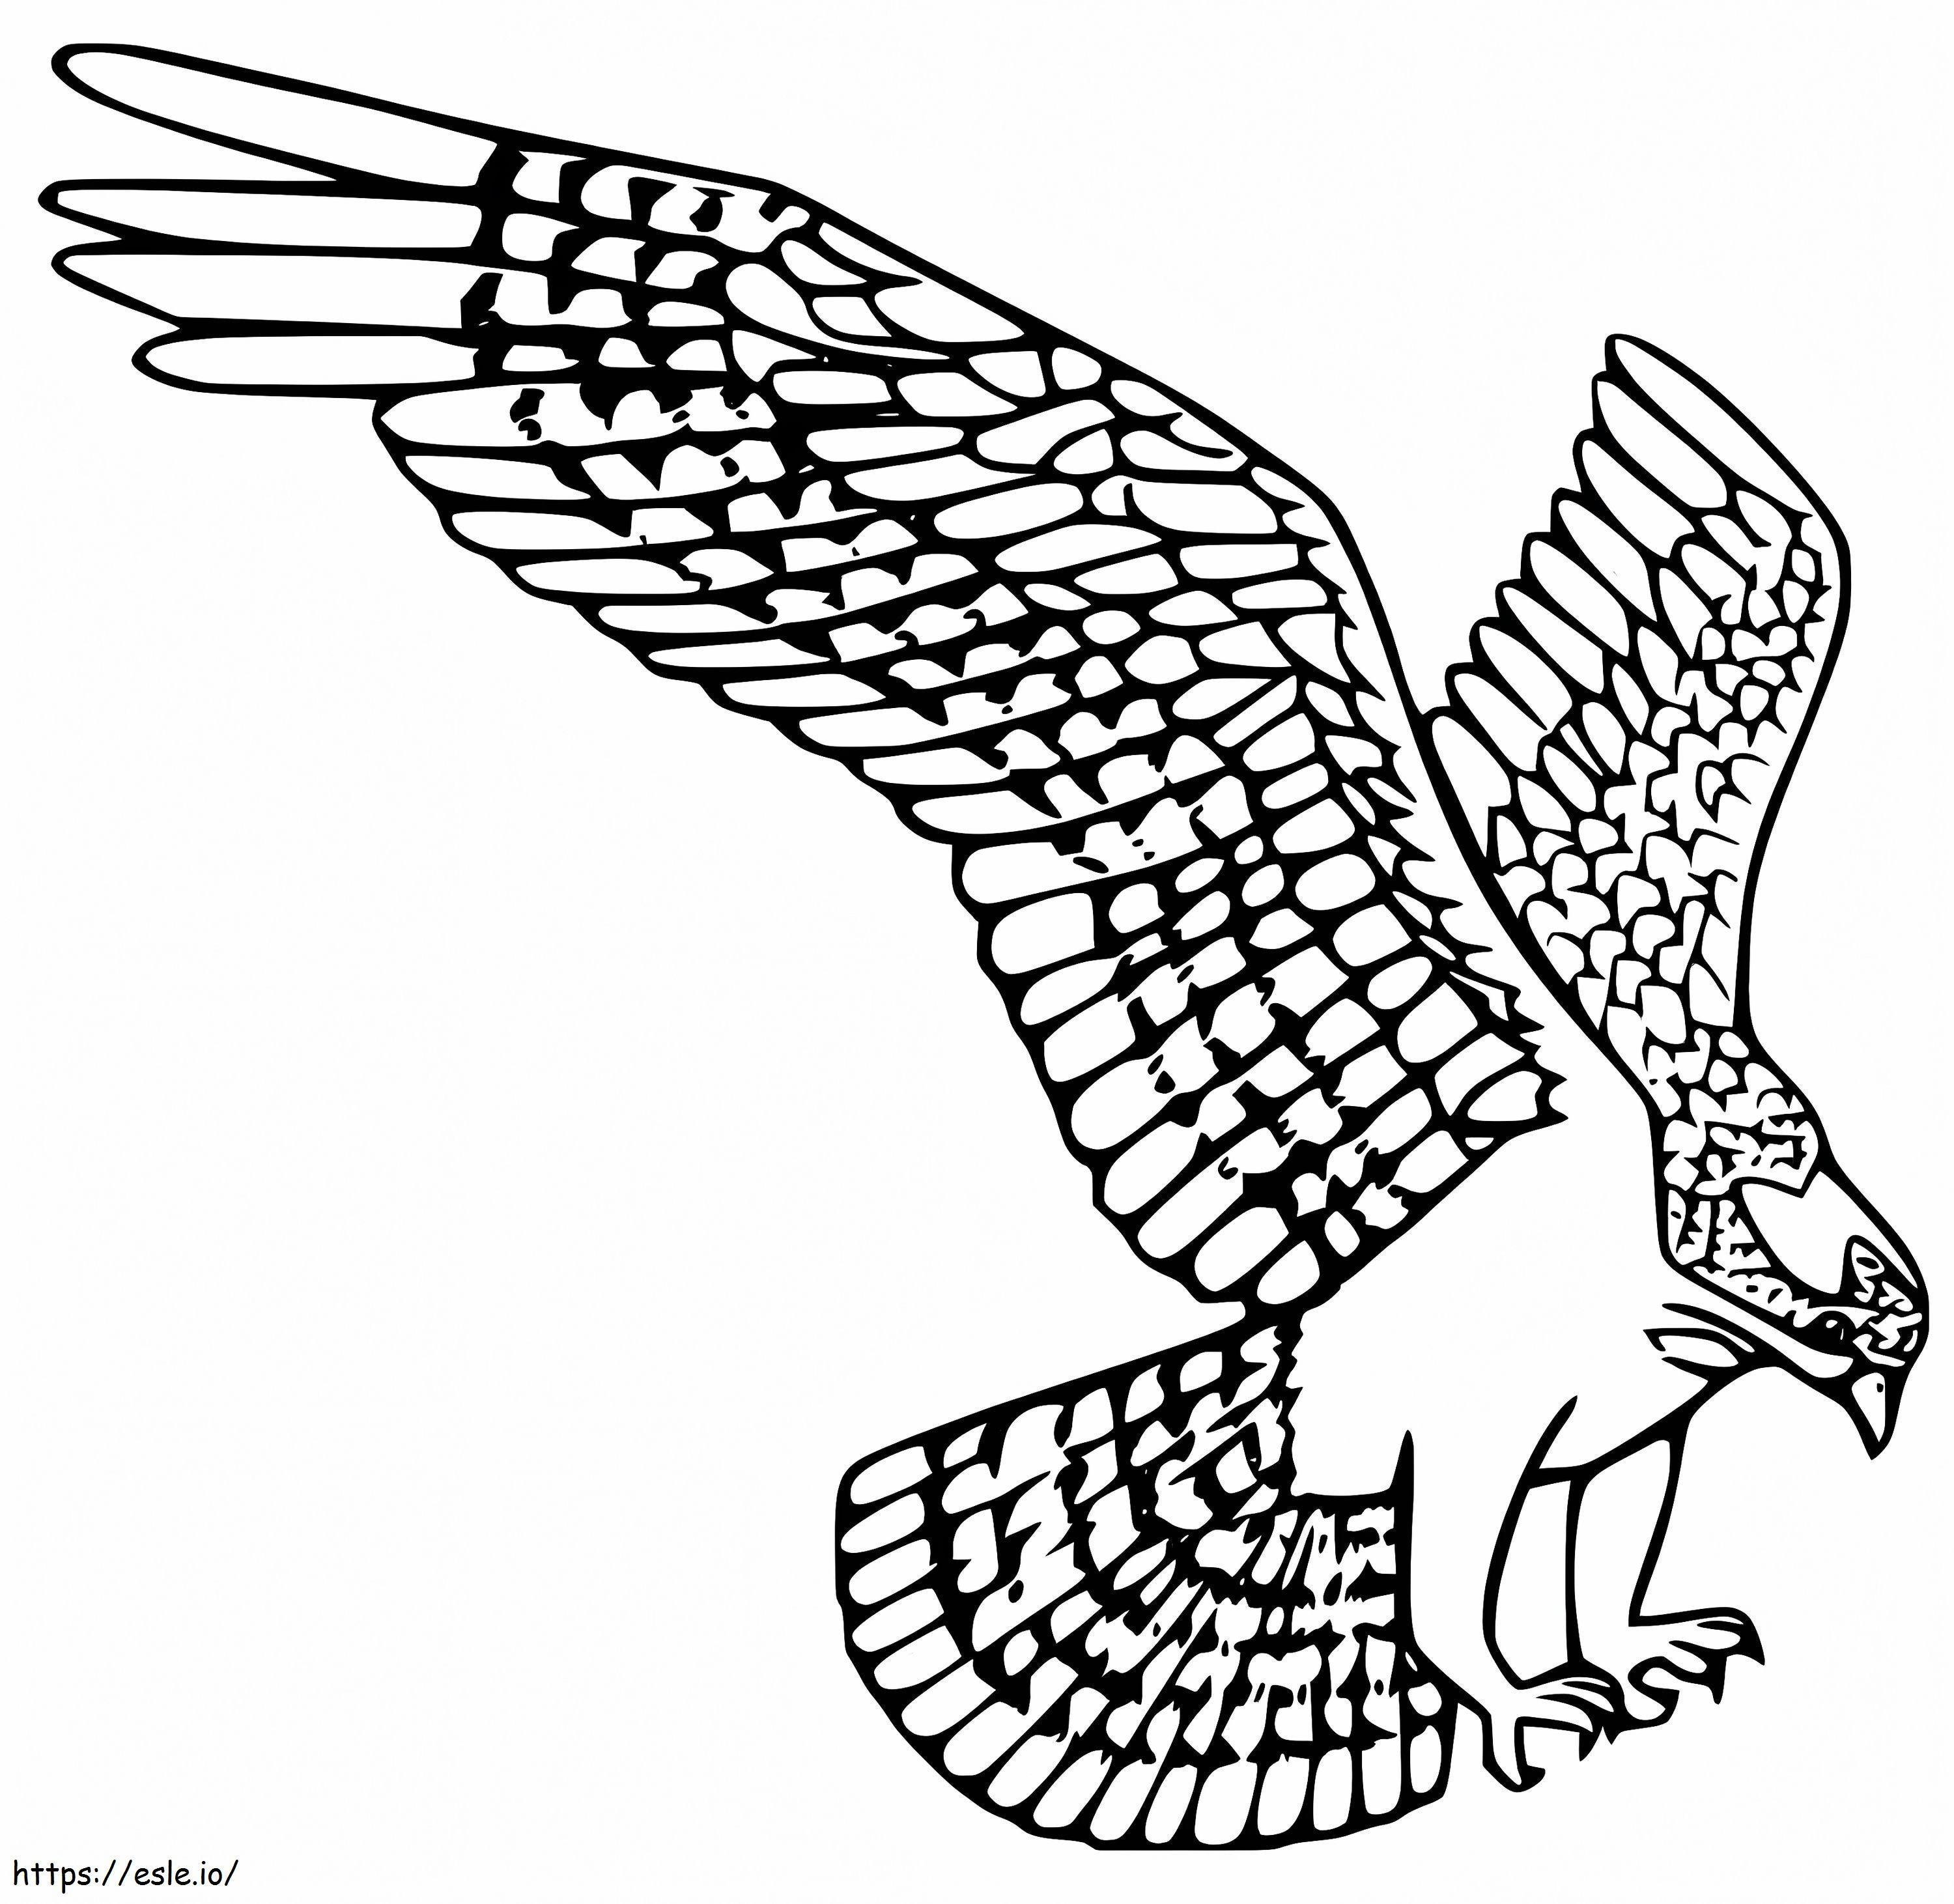 Osprey Hunting coloring page